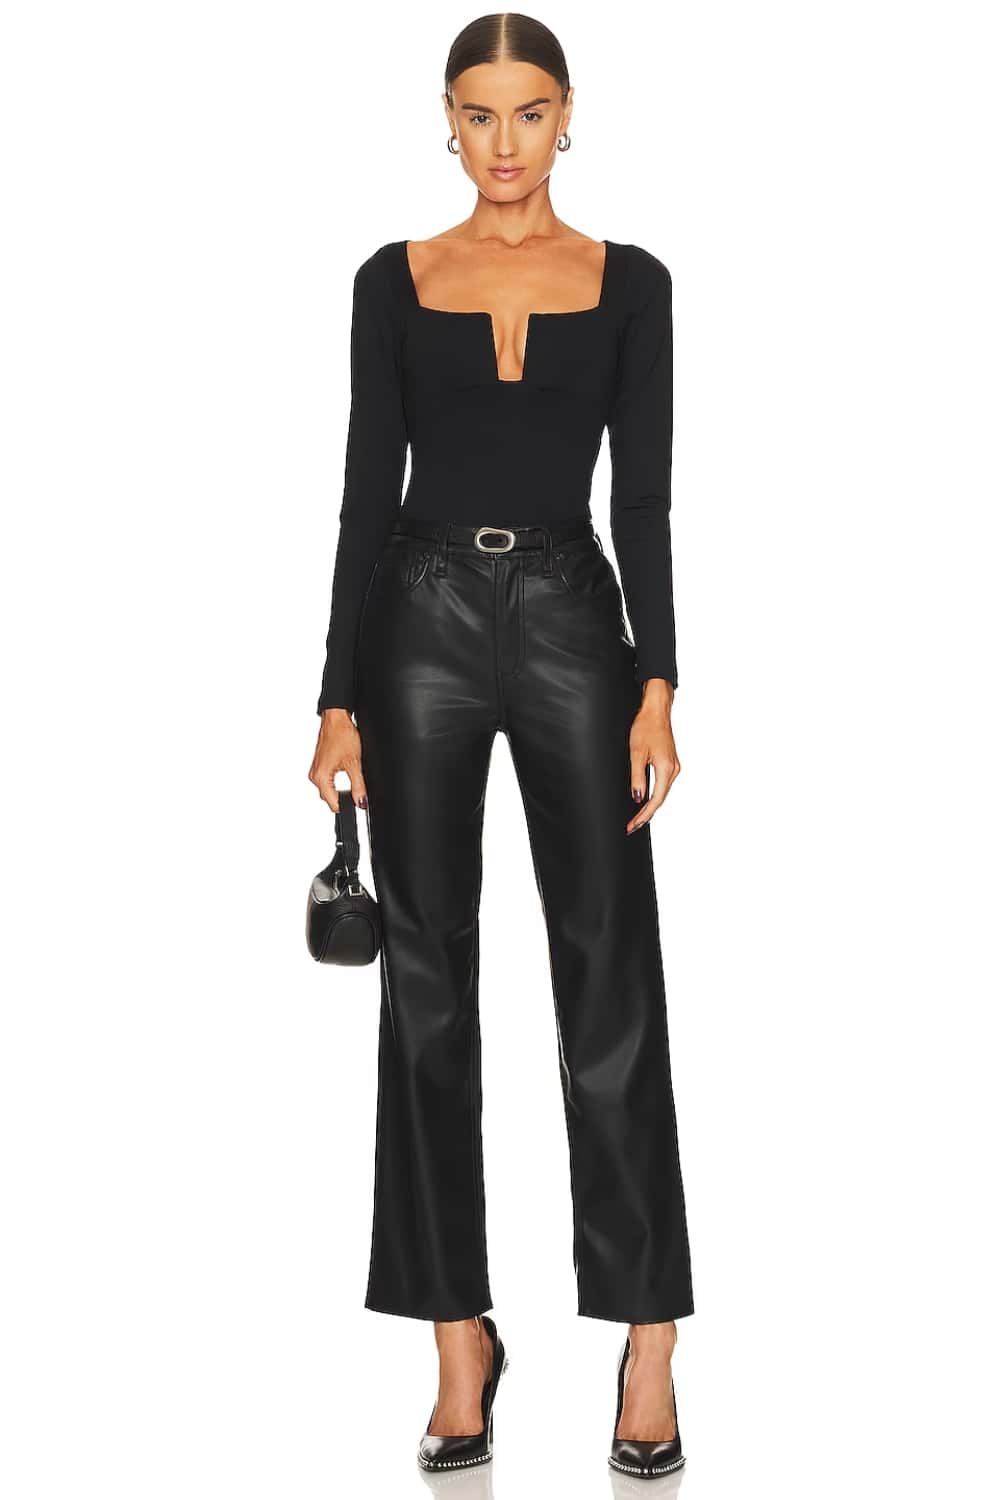 Bar outfits for ladies - Leather Pants with a Nice Top